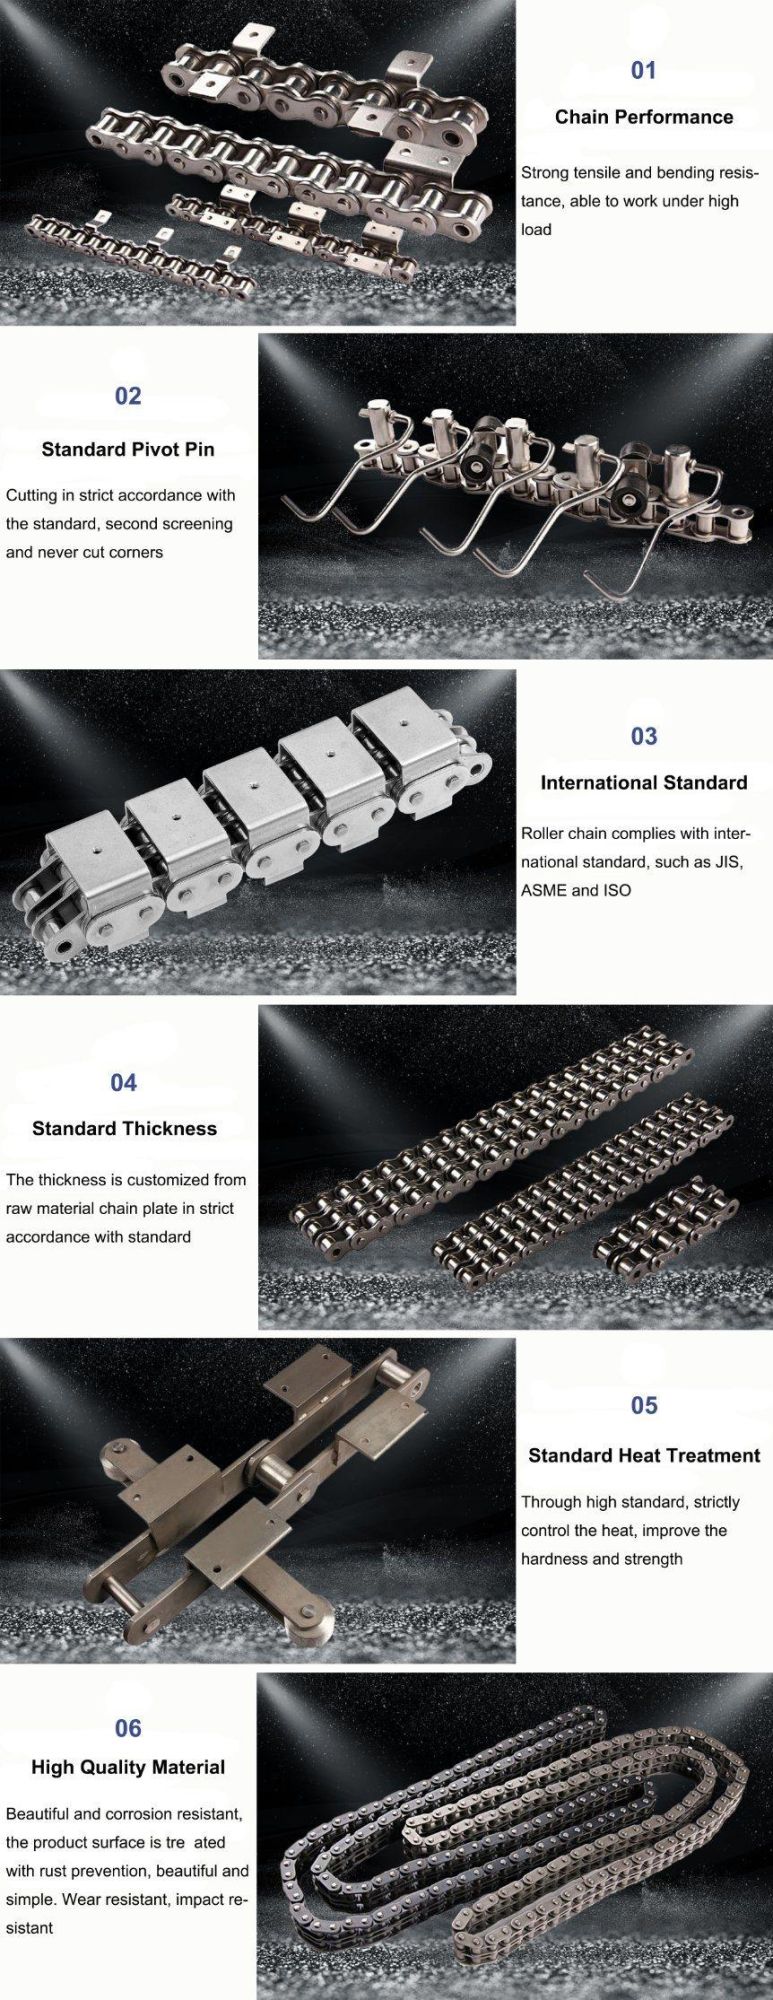 Factory Manufacturer Various Transmission Equipment Industrial Conveyor Roller Chain Special Welded Chains